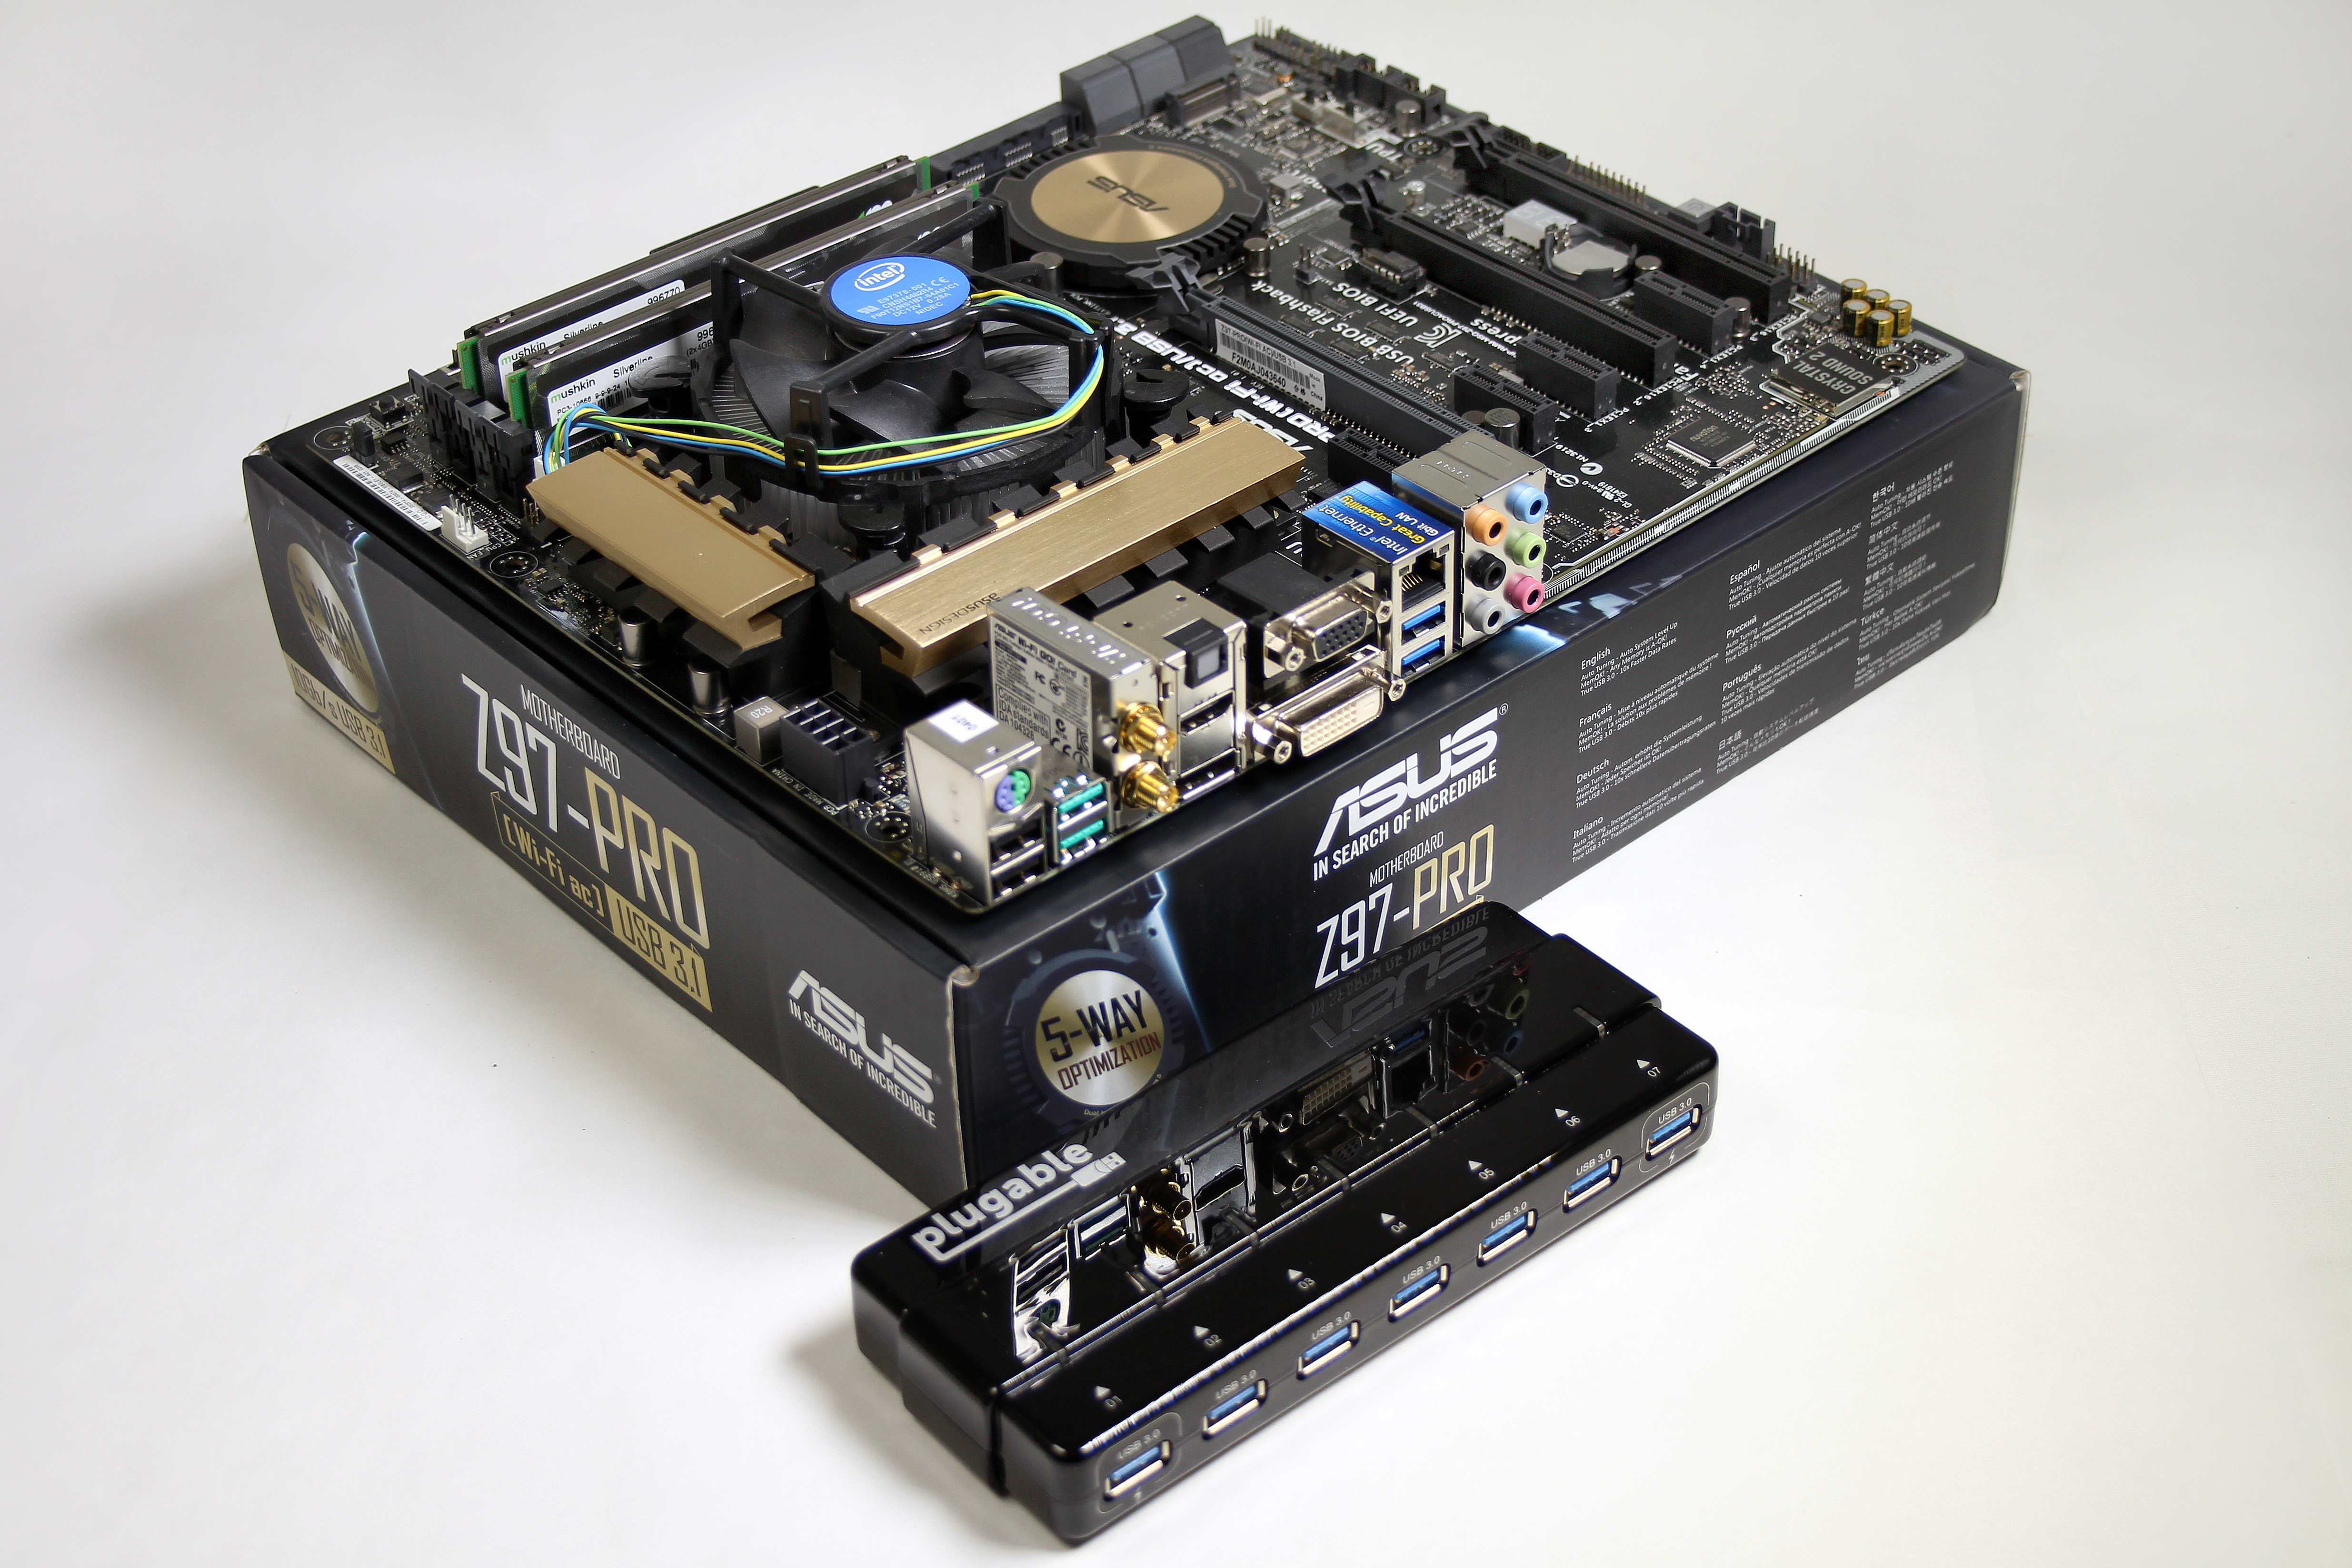 ASUS Z79 Pro motherboard with Plugable USB 3.0 Hub